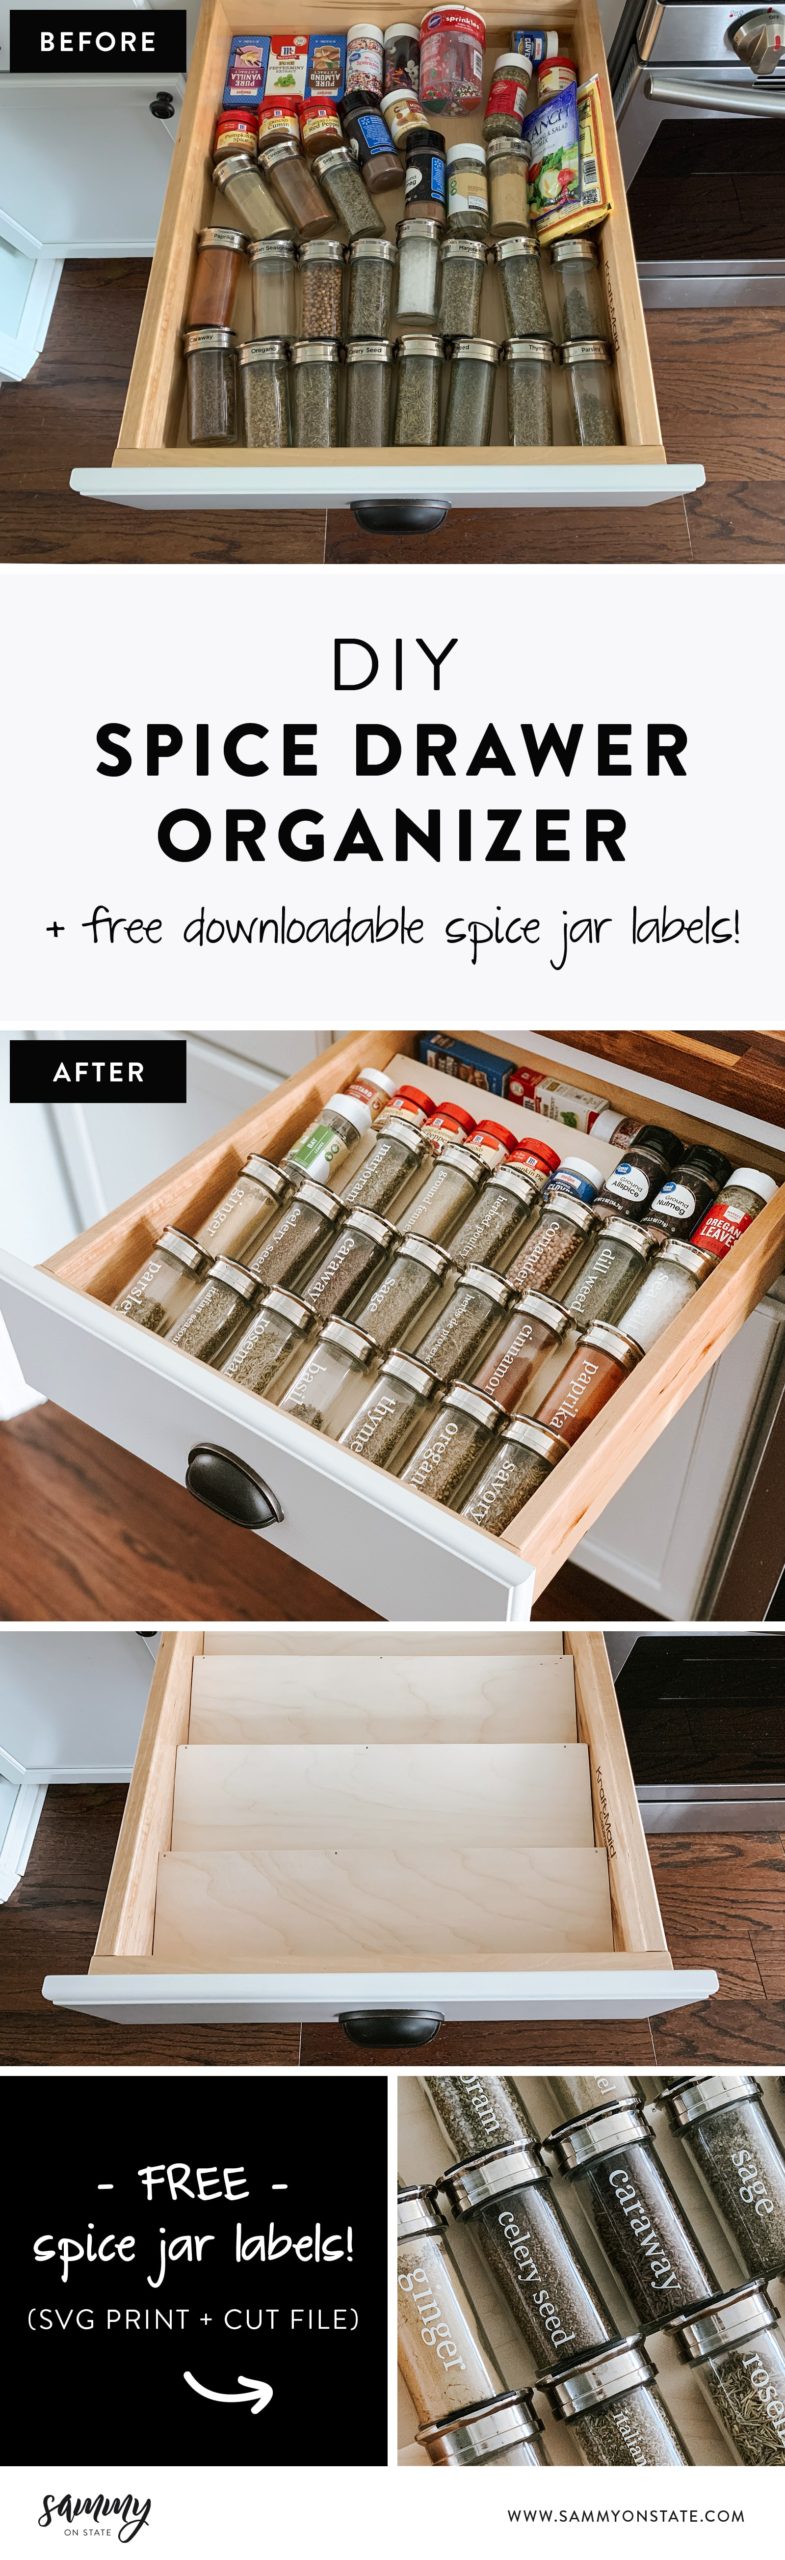 How To Make A Spice Rack Quick and Easy DIY Spice Drawer Organizer | Sammy On State